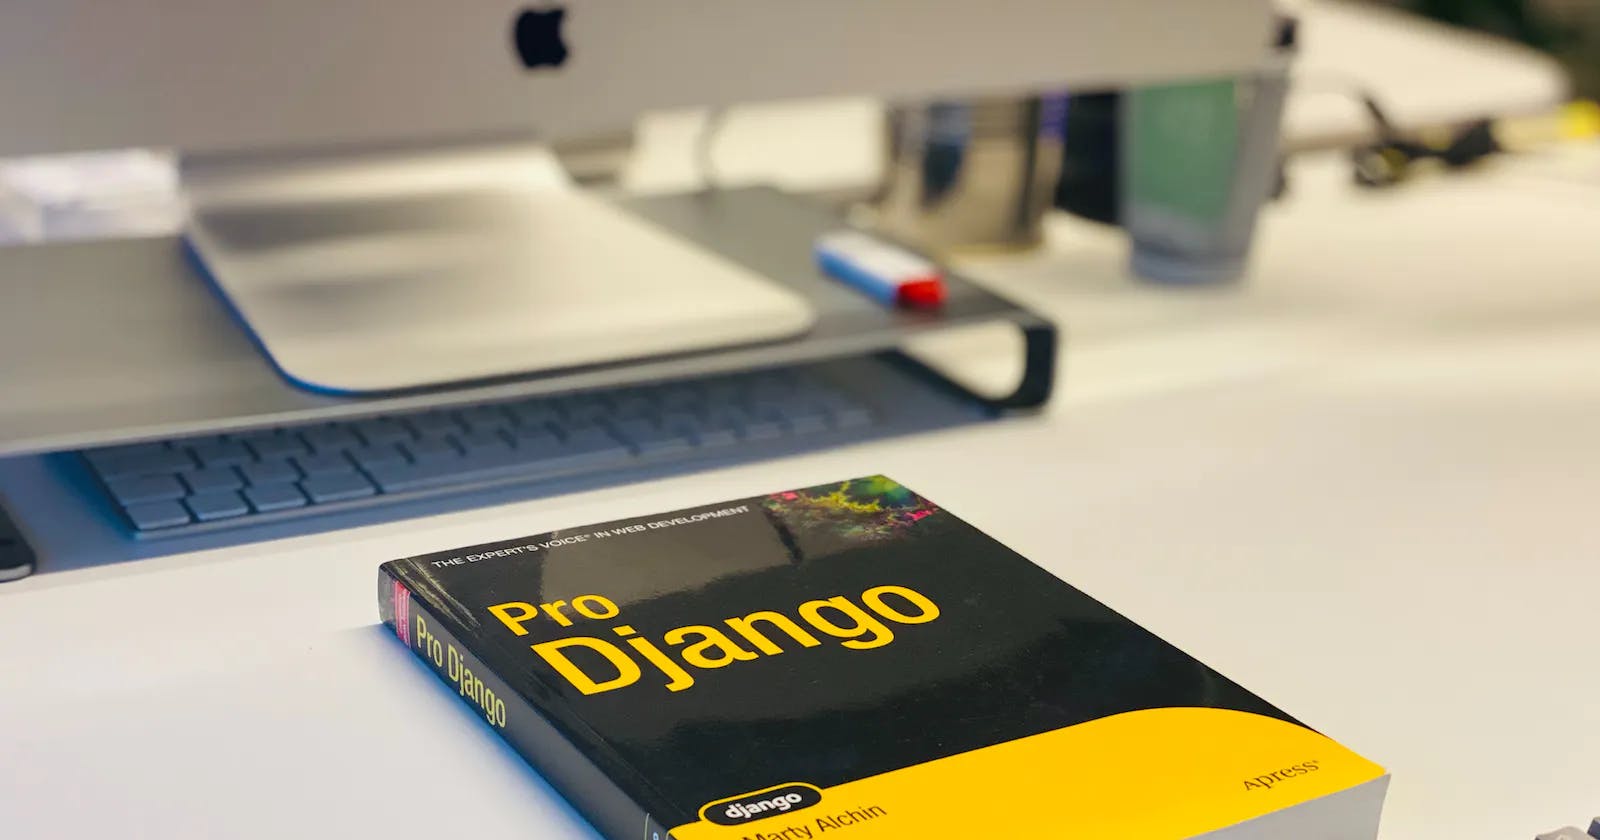 How to add an image in a Django Project - step by step explanation and guide